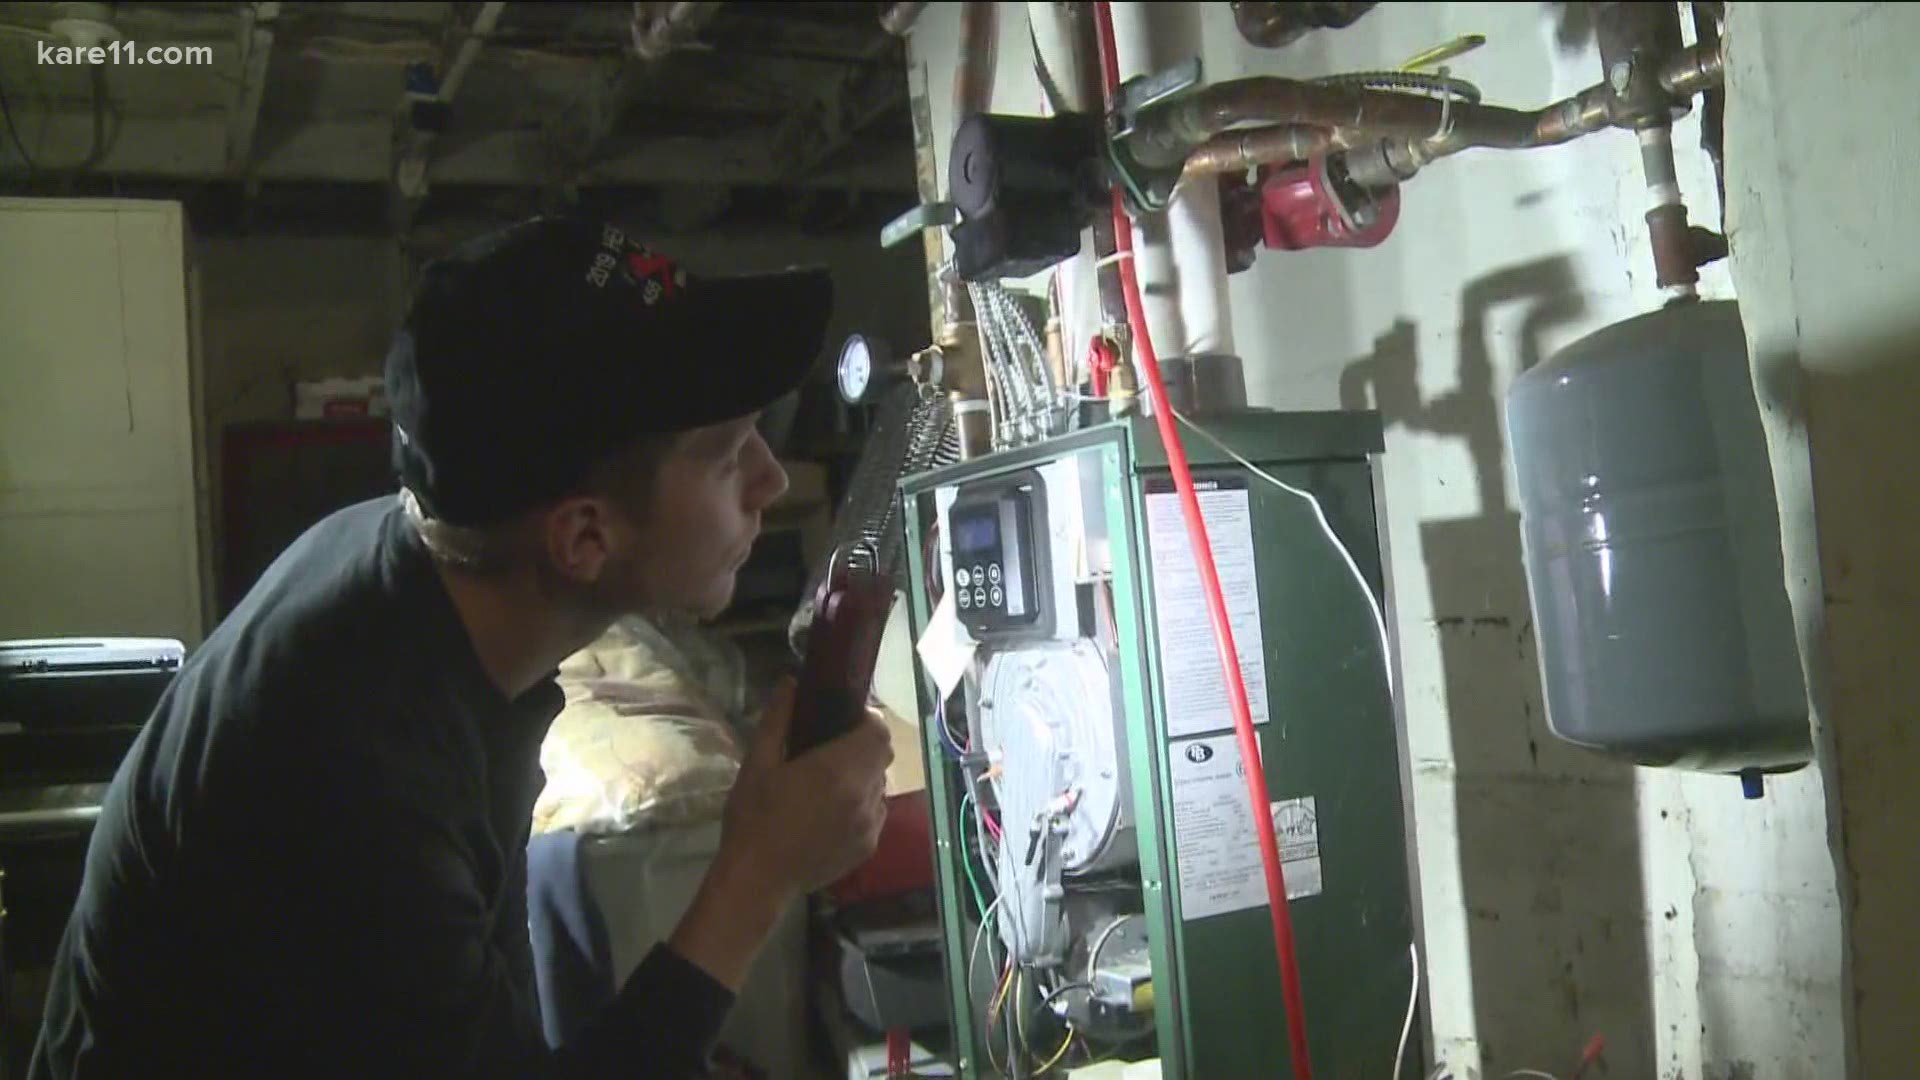 The recent cold stretch has air and heating technicians working in overdrive.